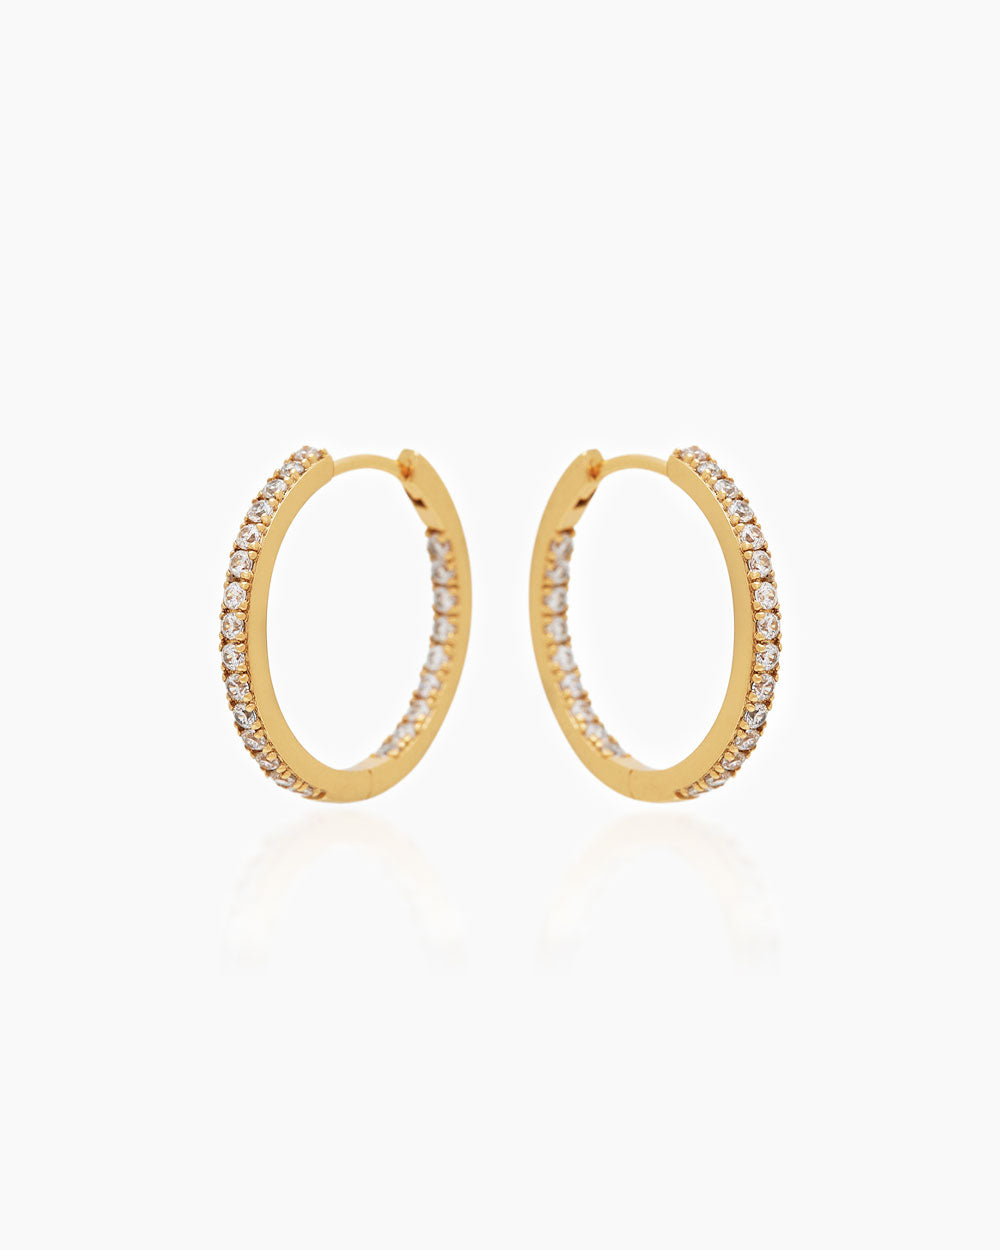 Janet Gold Hoops